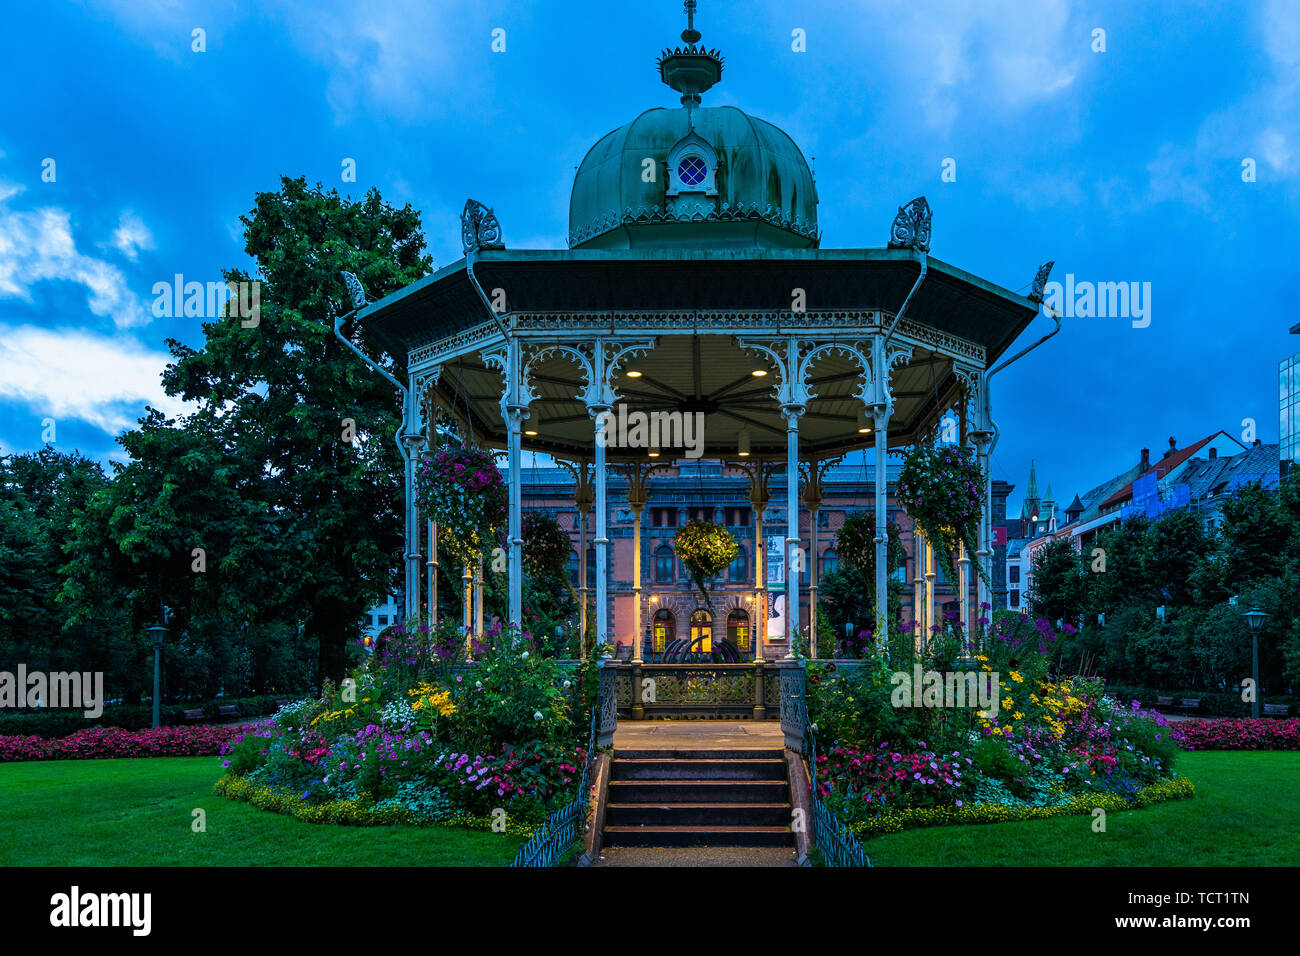 Night view of the iconic Music Pavilion one of the most popular tourist attraction in Bergen, located in Byparken, Norway Stock Photo